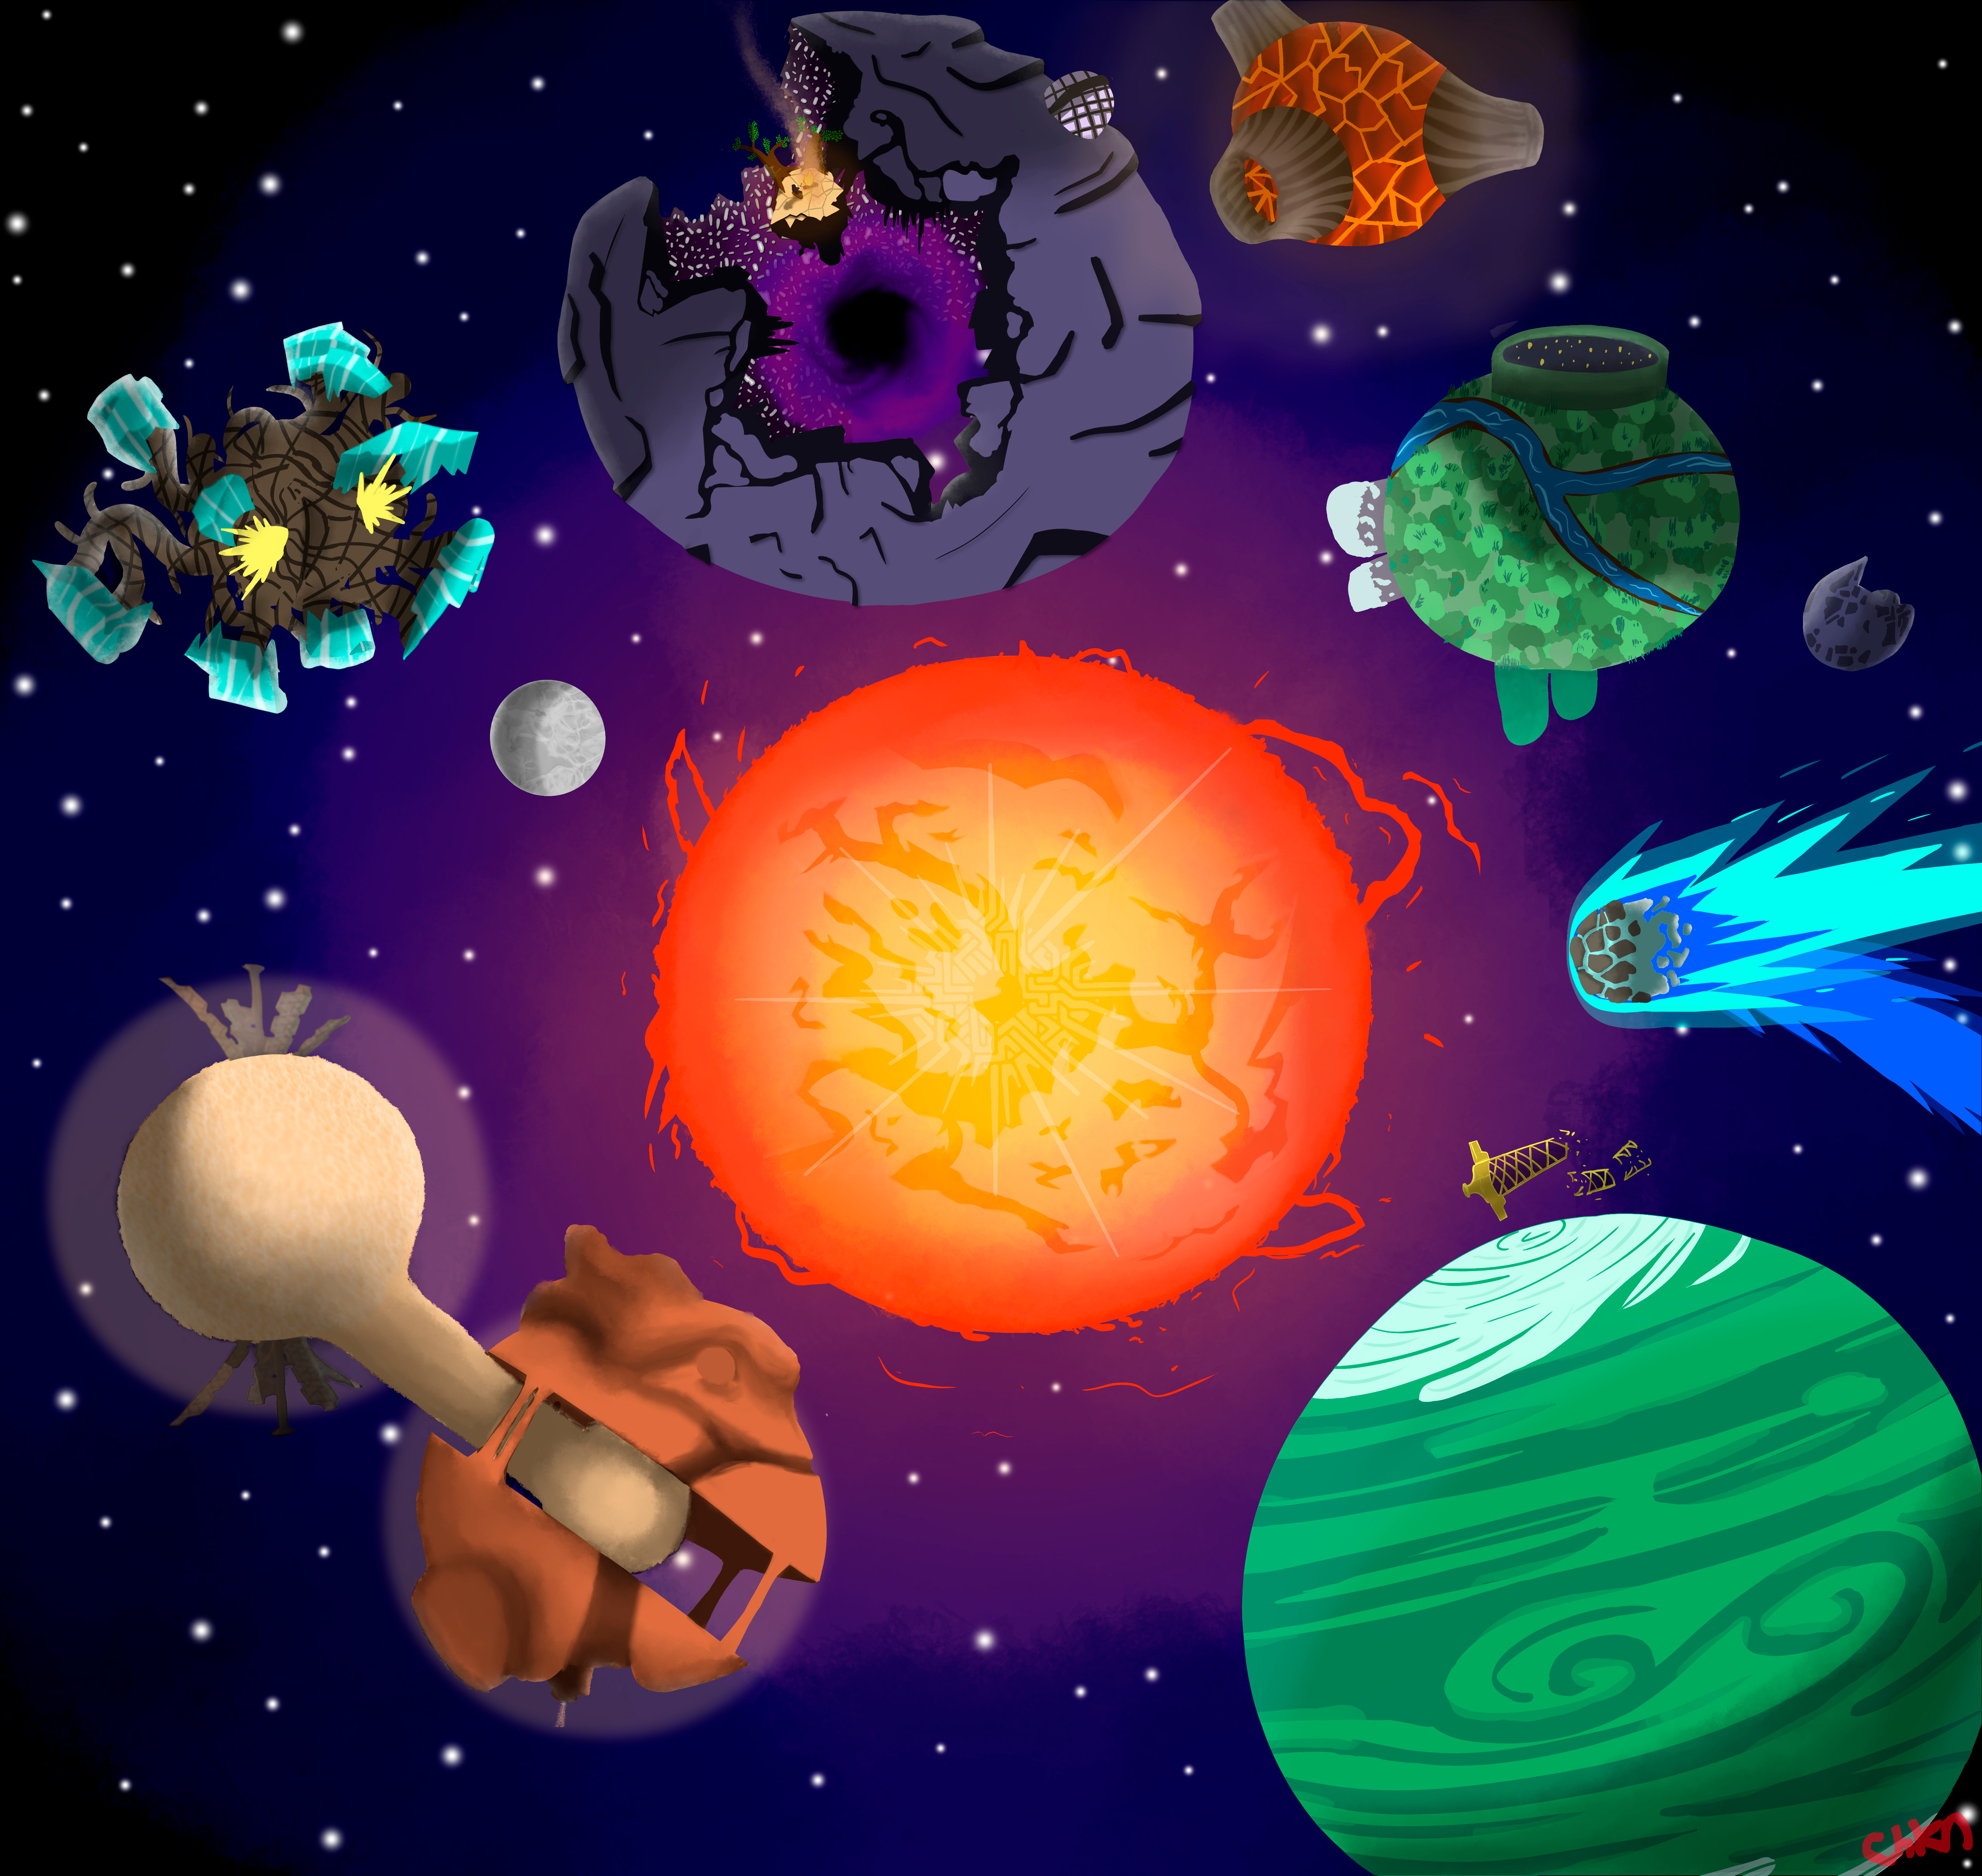 Outer Wilds Planets (64x64) by zarcy on DeviantArt